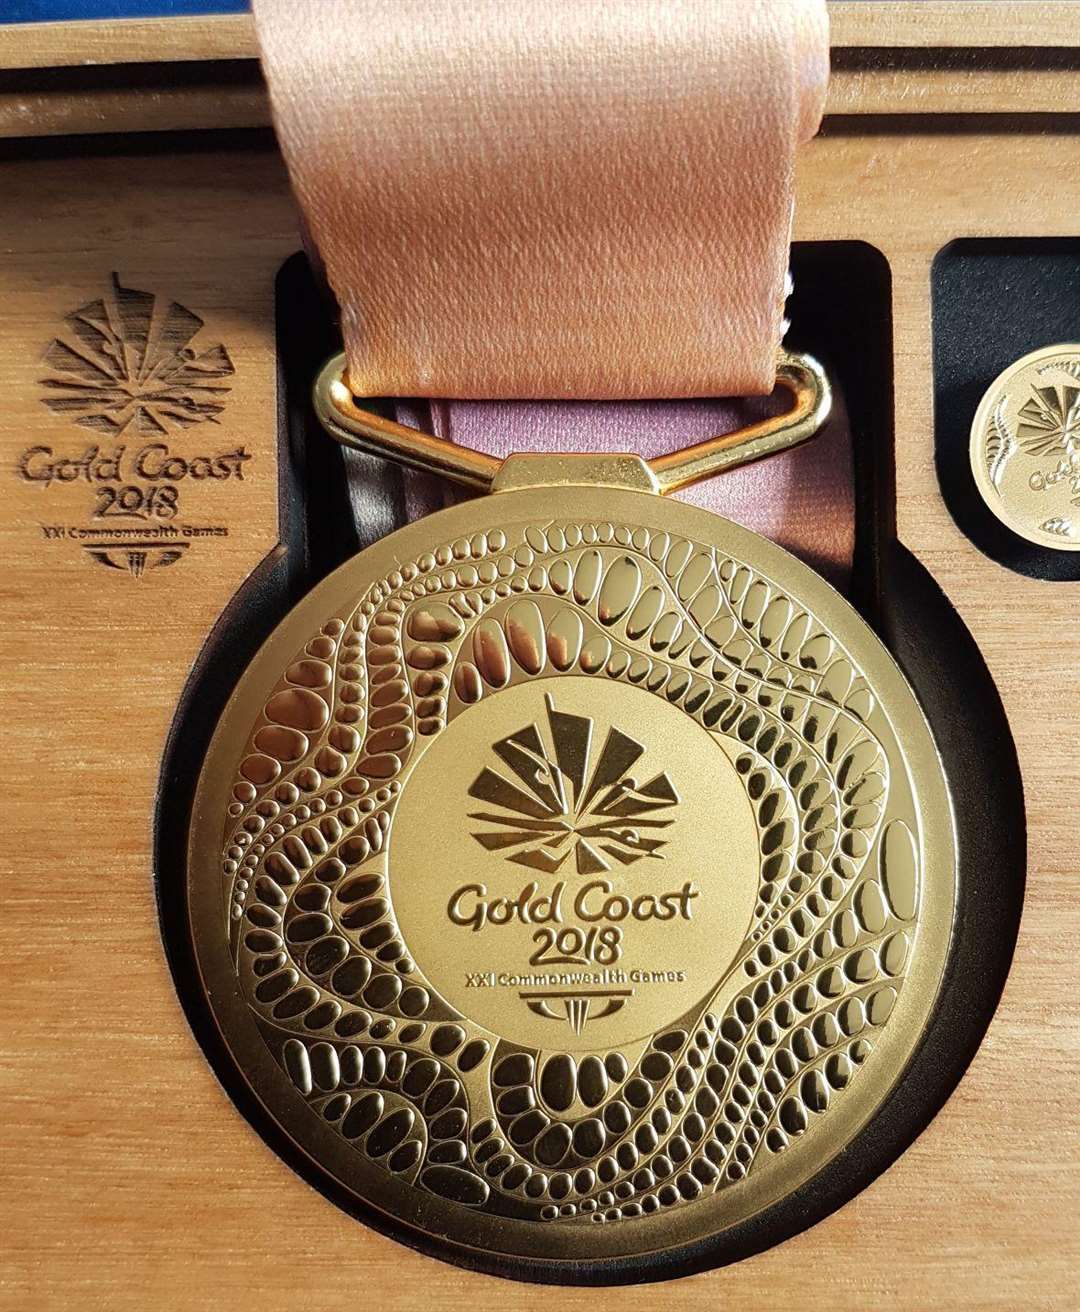 The prize - Commonwealth gold